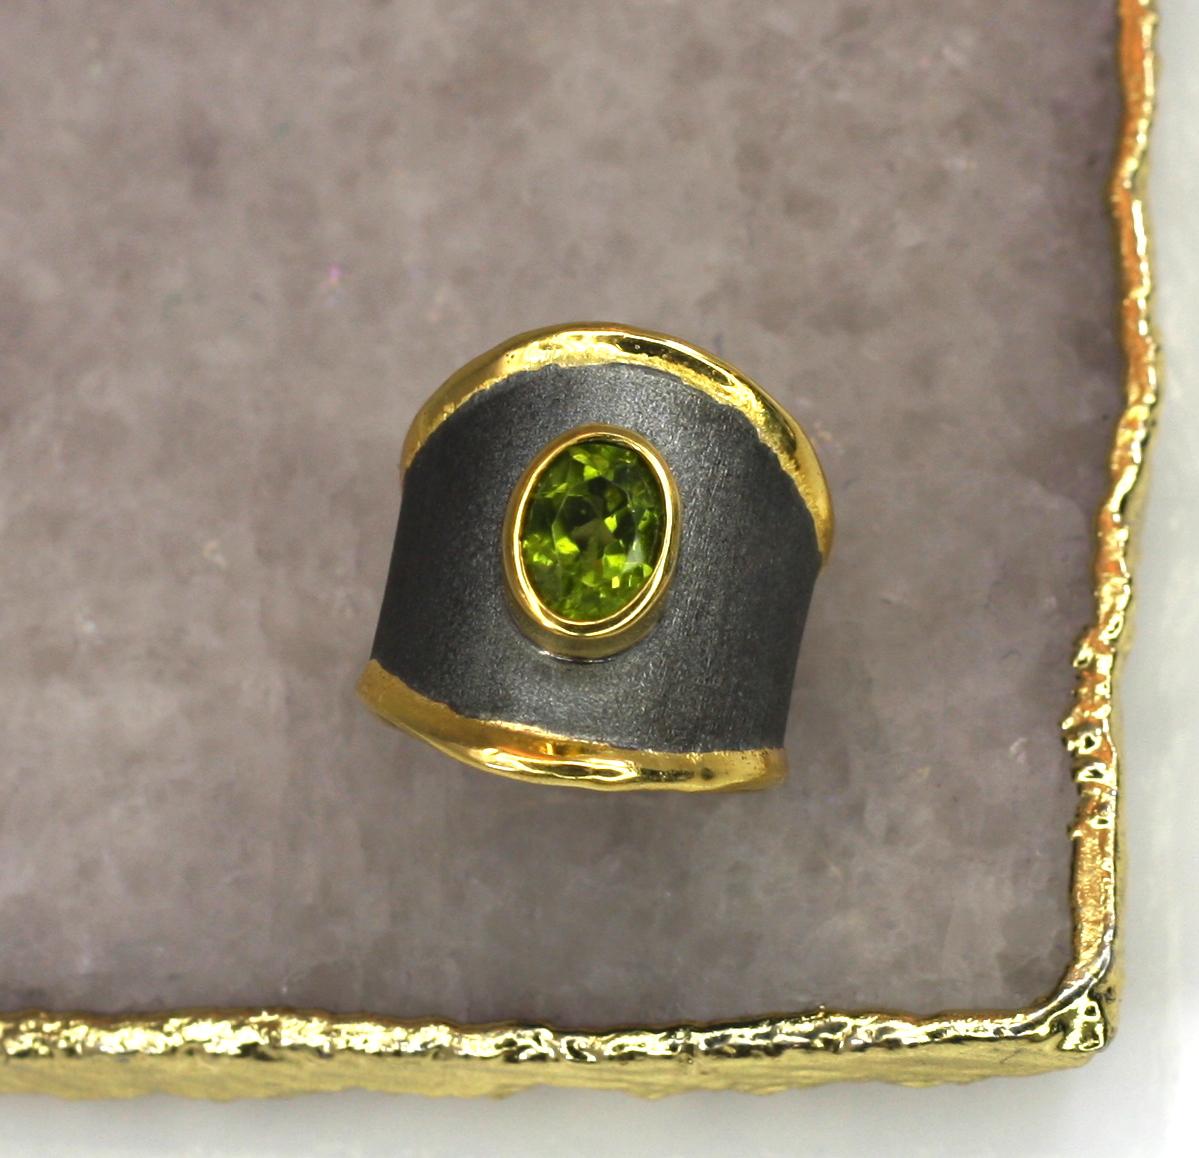 Oval Cut Yianni Creations Peridot Fine Silver Ring Finished with Rhodium and Pure Gold